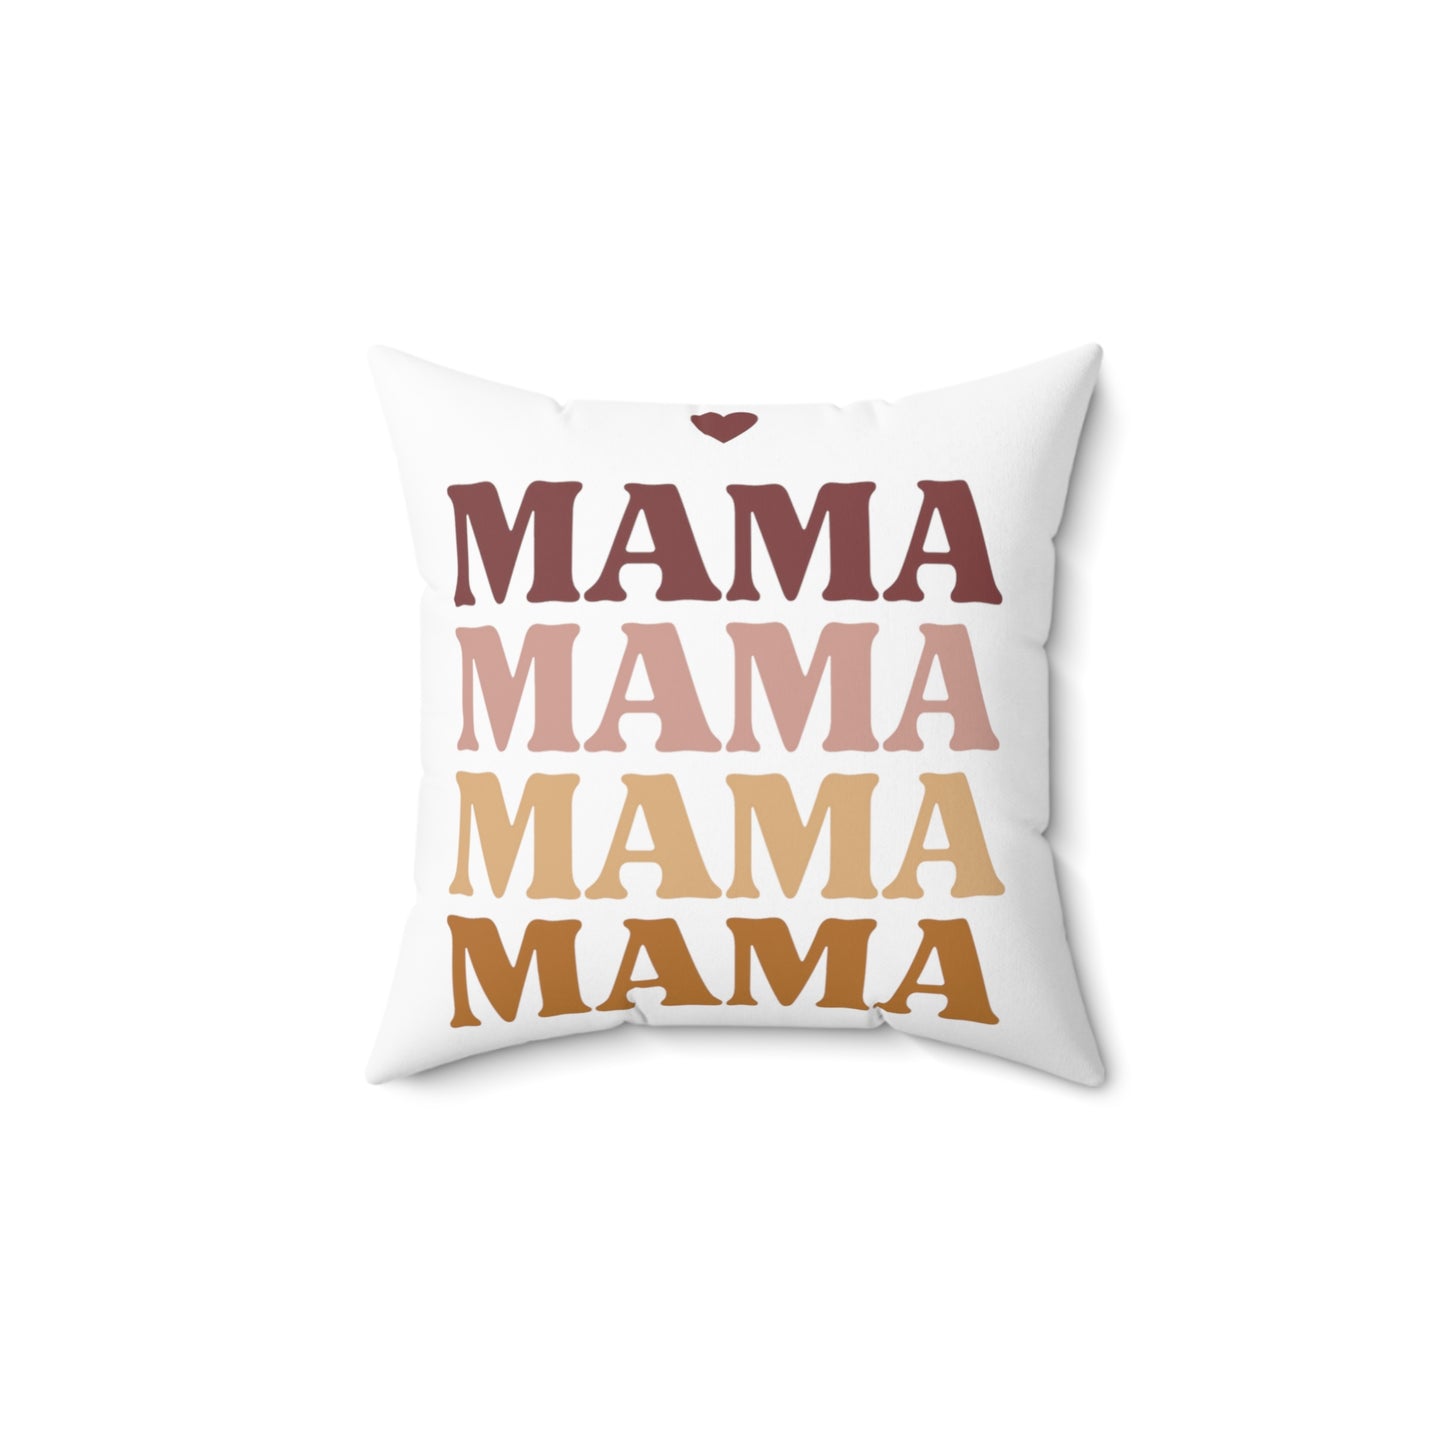 MAMA - Mothers Day Gift - Polyester Square Pillow